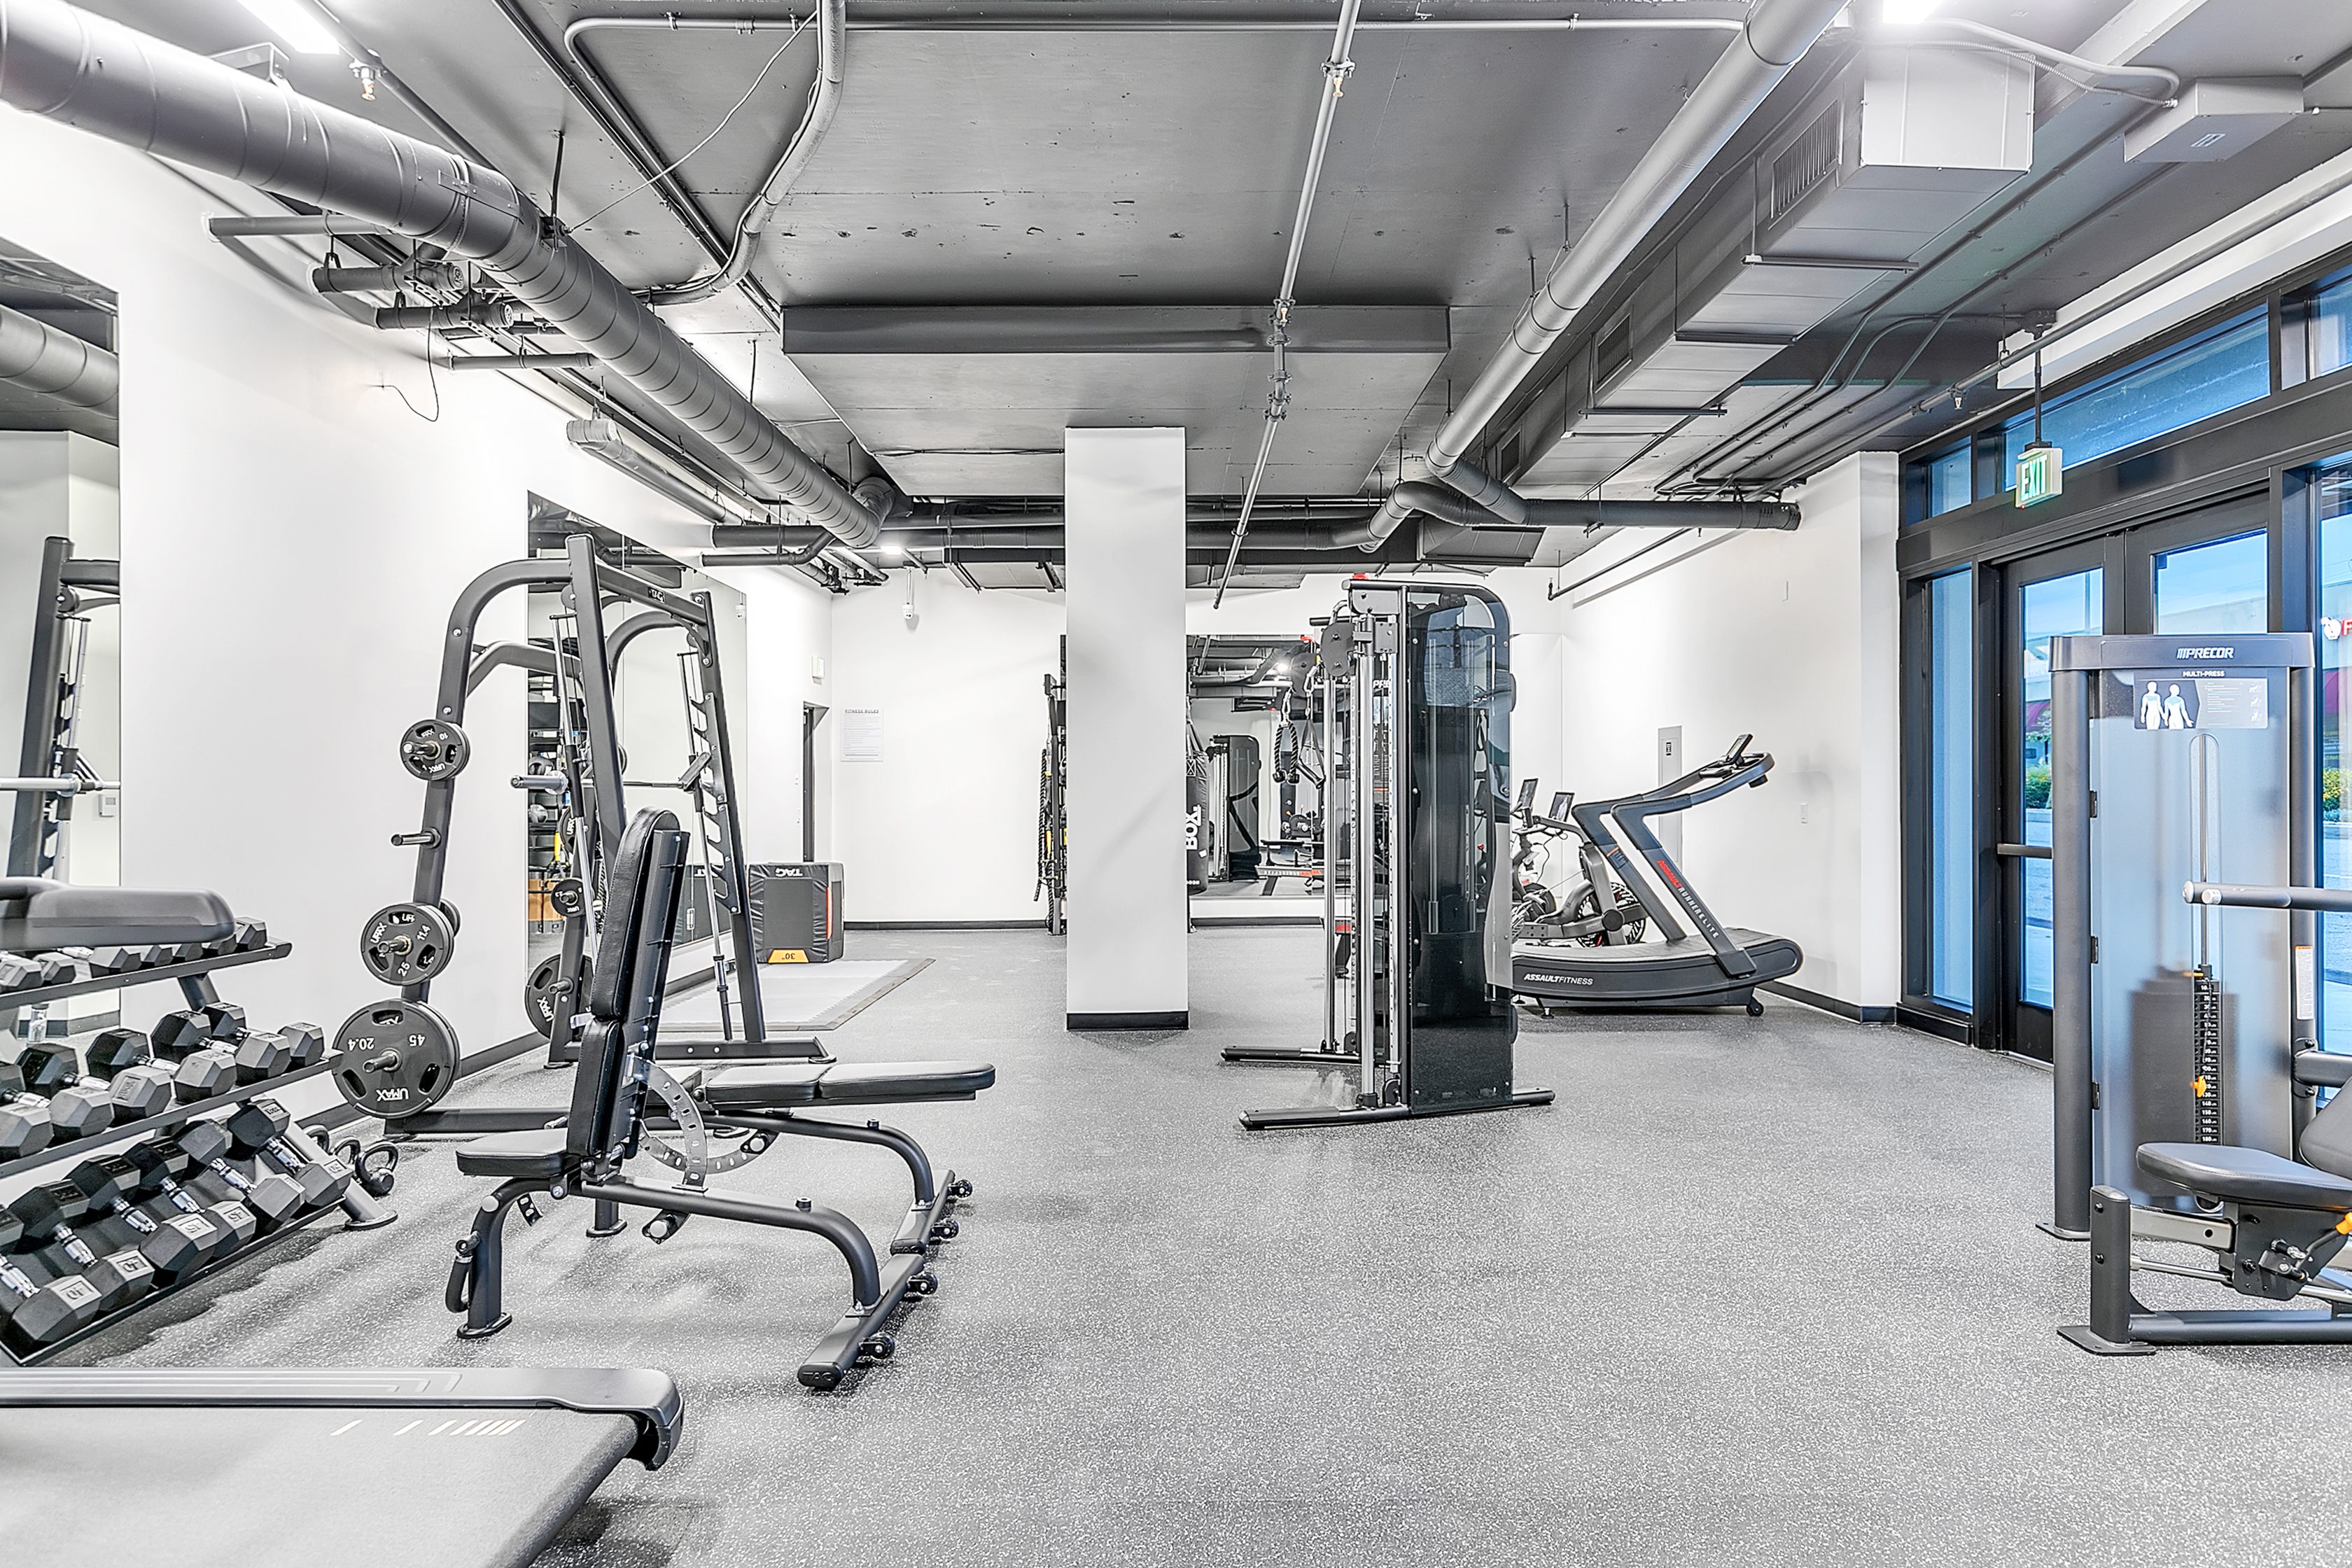 A multifamily apartment with a gym room equipped with a variety of machines and equipment called The Rinrose.